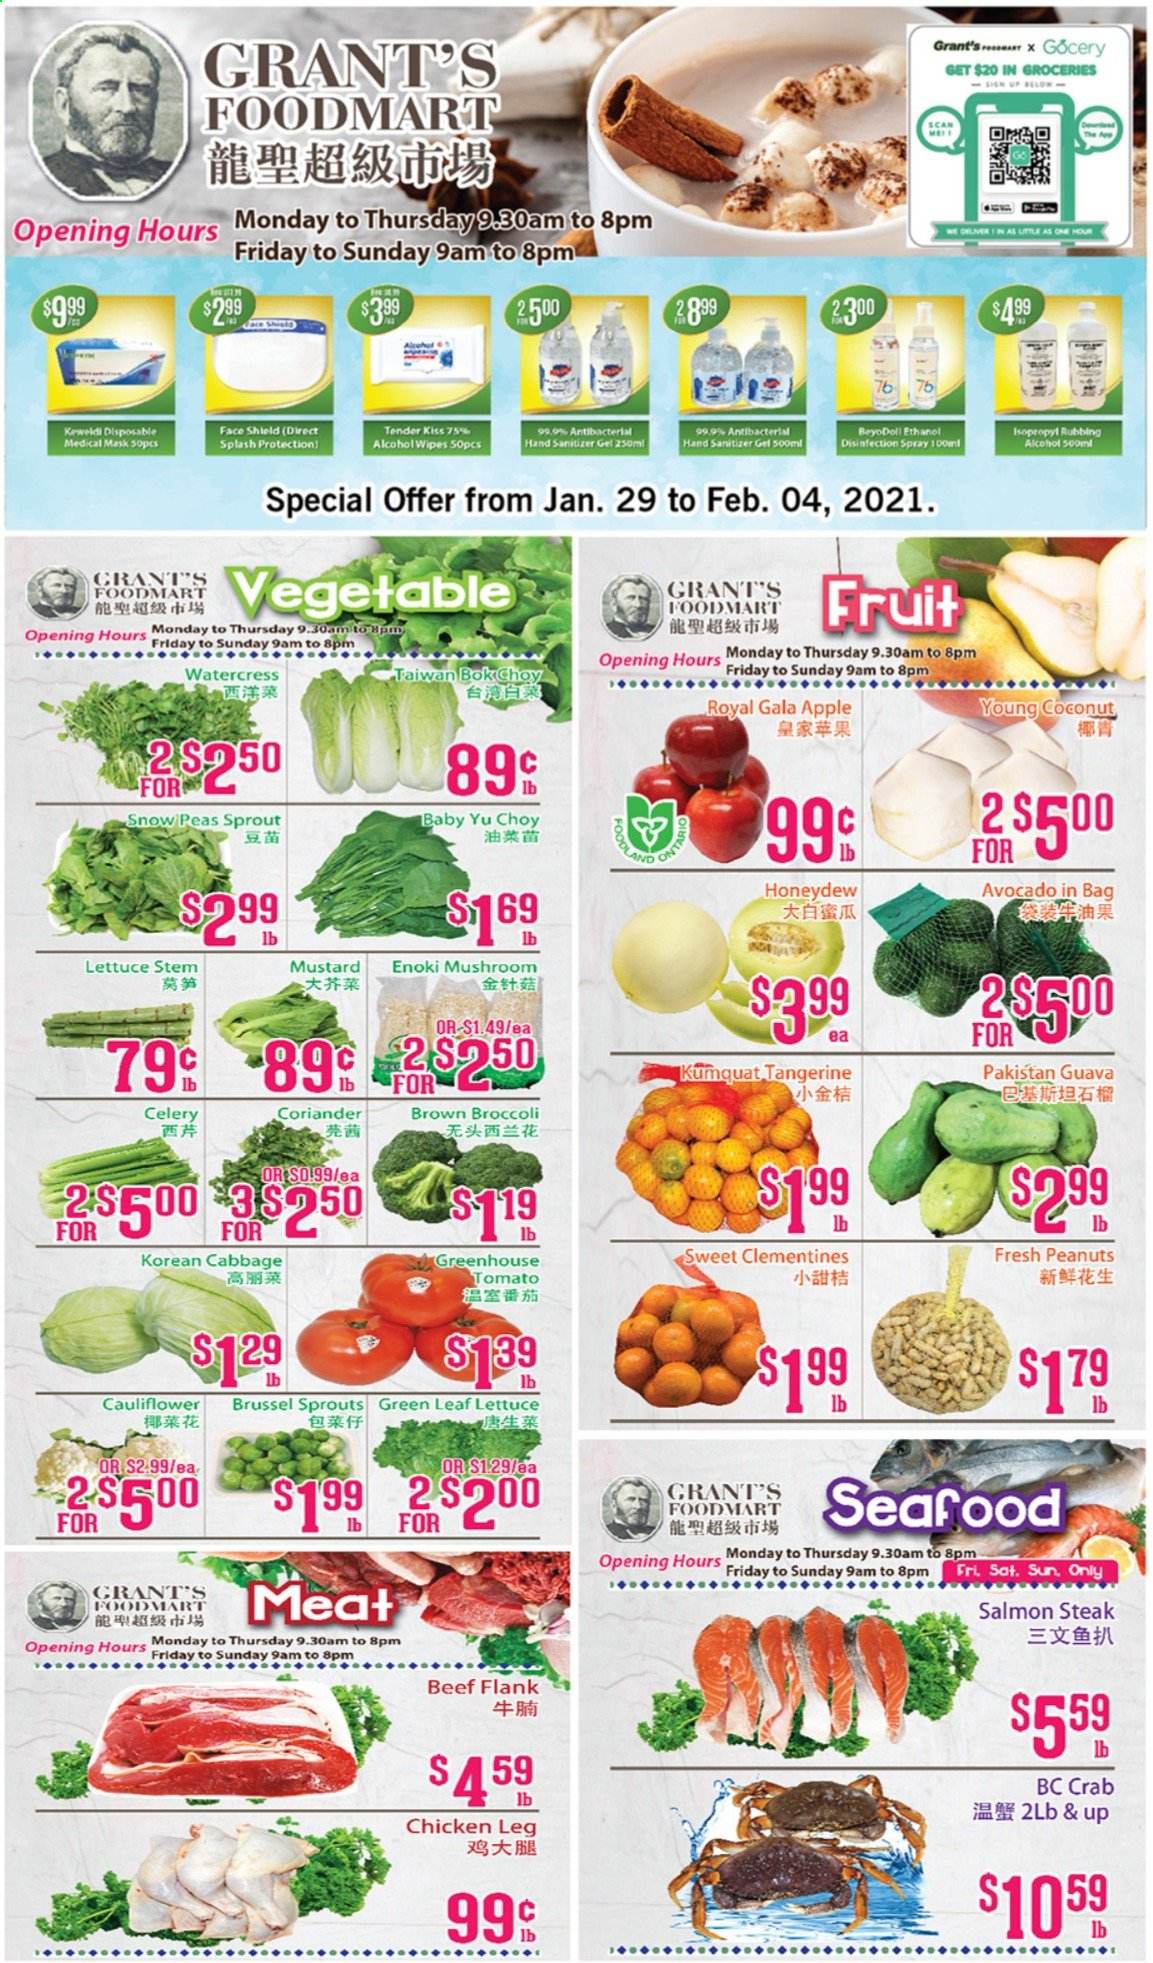 thumbnail - Grant's Foodmart Flyer - January 29, 2021 - February 04, 2021 - Sales products - mushrooms, broccoli, cabbage, cauliflower, celery, peas, lettuce, brussel sprouts, avocado, clementines, Gala, guava, honeydew, coconut, salmon, crab, snow peas, watercress, coriander, mustard, peanuts, Grant's, chicken legs, hand sanitizer, steak. Page 1.